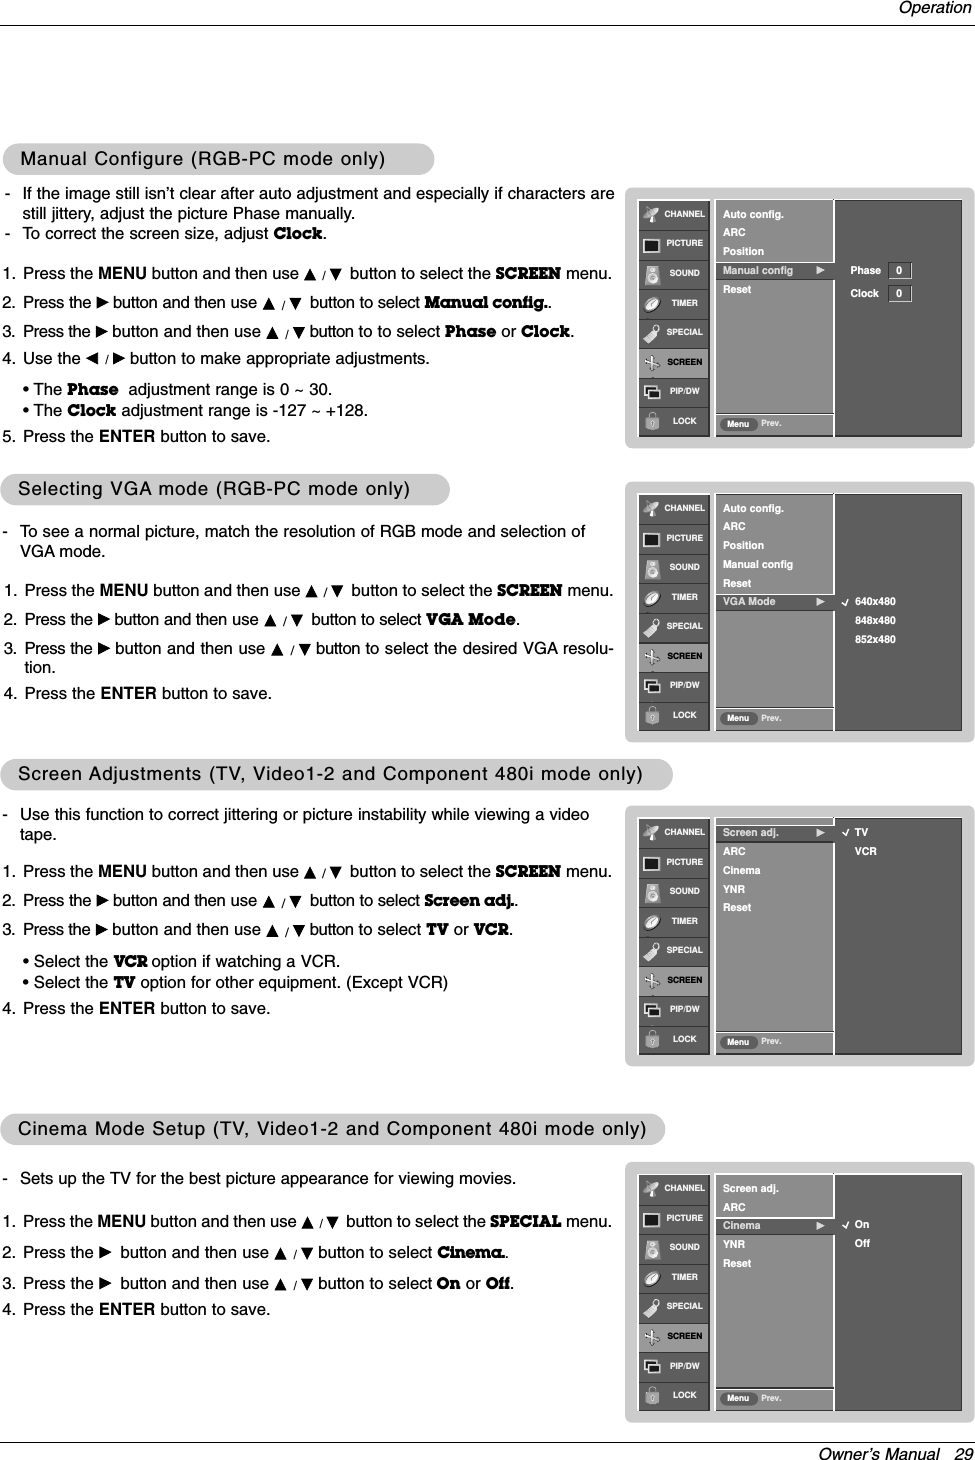 Owner’s Manual   29OperationCHANNELPICTURESOUNDTIMERSPECIALSCREENPIP/DWLOCK Prev.MenuTVVCRScreen adj. GARCCinemaYNRResetCHANNELPICTURESOUNDTIMERSPECIALSCREENPIP/DWLOCK Prev.MenuOnOffScreen adj.ARCCinema GYNRResetScreen Screen Adjustments (TVAdjustments (TV, V, Video1-2 and Component 480i mode only)ideo1-2 and Component 480i mode only)- Use this function to correct jittering or picture instability while viewing a videotape.1. Press the MENU button and then use D /Ebutton to select the SCREEN menu.2. Press the Gbutton and then use D /Ebutton to select Screen adj..3. Press the Gbutton and then use D /Ebutton to select TV or VCR.• Select the VCR option if watching a VCR. • Select the TV option for other equipment. (Except VCR)4. Press the ENTER button to save.- Sets up the TV for the best picture appearance for viewing movies.1. Press the MENU button and then use D / Ebutton to select the SPECIAL menu.2. Press the Gbutton and then use D / Ebutton to select Cinema..3. Press the Gbutton and then use D / Ebutton to select On or Off.4. Press the ENTER button to save.Cinema Mode Setup (TVCinema Mode Setup (TV, V, Video1-2 and Component 480i mode only)ideo1-2 and Component 480i mode only)CHANNELPICTURESOUNDTIMERSPECIALSCREENPIP/DWLOCK Prev.MenuAuto config.ARCPositionManual config GResetManual Configure (RGB-PC mode only)Manual Configure (RGB-PC mode only)- If the image still isn’t clear after auto adjustment and especially if characters arestill jittery, adjust the picture Phase manually.- To correct the screen size, adjust Clock.1. Press the MENU button and then use D / Ebutton to select the SCREEN menu.2. Press the Gbutton and then use D / Ebutton to select Manual config..3. Press the Gbutton and then use D / Ebutton to to select Phase or Clock.4. Use the F / Gbutton to make appropriate adjustments.• The Phase adjustment range is 0 ~ 30.• The Clock adjustment range is -127 ~ +128.5. Press the ENTER button to save.Phase 0Clock 0CHANNELPICTURESOUNDTIMERSPECIALSCREENPIP/DWLOCK Prev.MenuAuto config.ARCPositionManual configResetVGA Mode G640x480848x480852x480Selecting VGASelecting VGA mode (RGB-PC mode only)mode (RGB-PC mode only)- To see a normal picture, match the resolution of RGB mode and selection ofVGA mode.1. Press the MENU button and then use D /Ebutton to select the SCREEN menu.2. Press the Gbutton and then use D /Ebutton to select VGA Mode.3. Press the Gbutton and then use D  /Ebutton to select the desired VGA resolu-tion.4. Press the ENTER button to save.